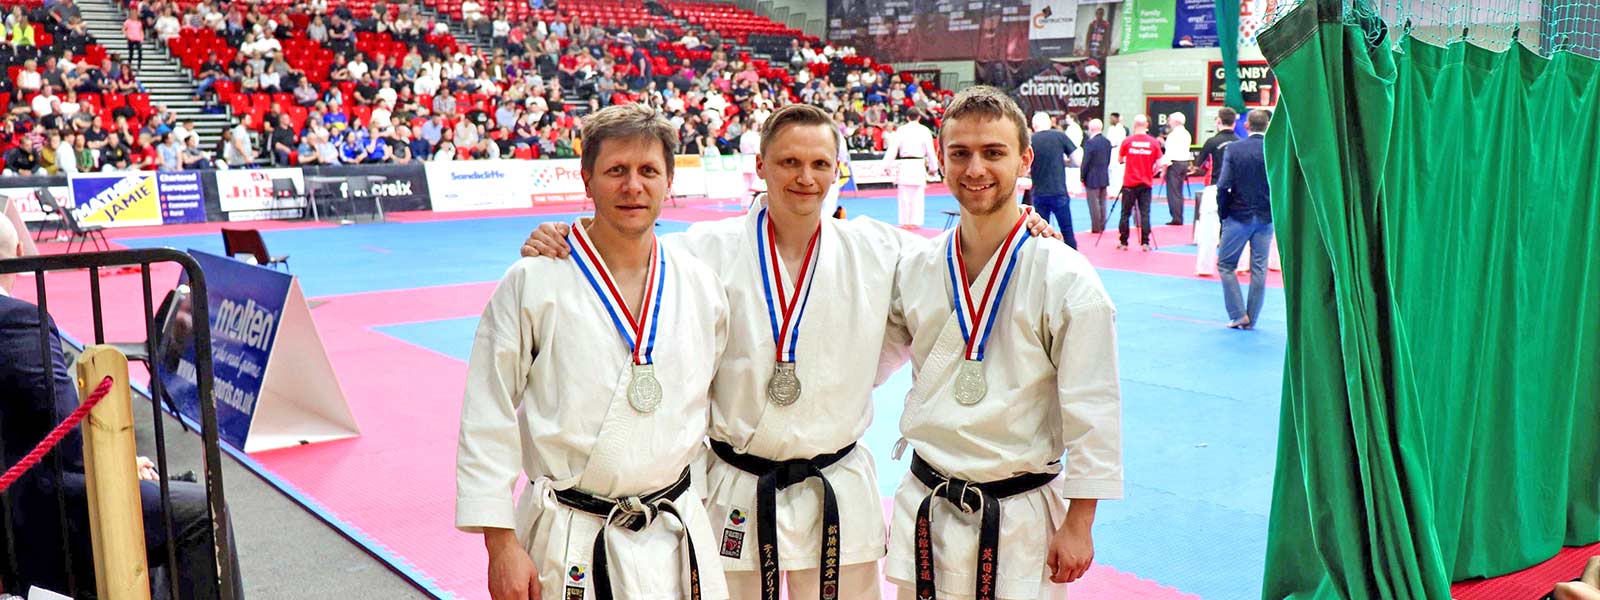 Sensei Steven Connell winning silver as part of the Bristol Karate Academy team at the KUGB National Championships